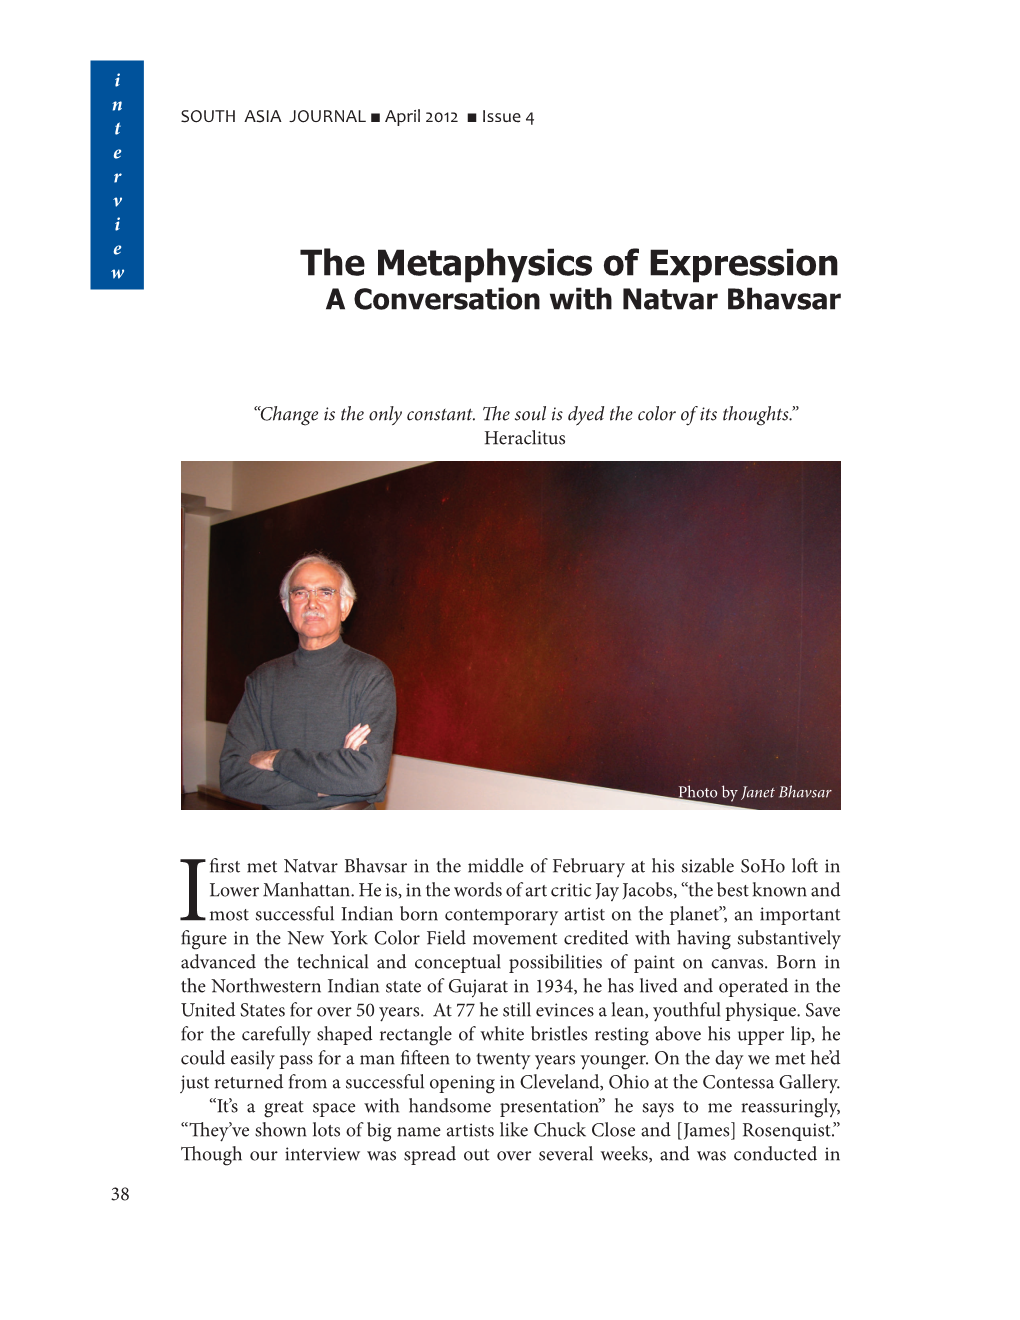 The Metaphysics of Expression: a Conversation with Natvar Bhavsar